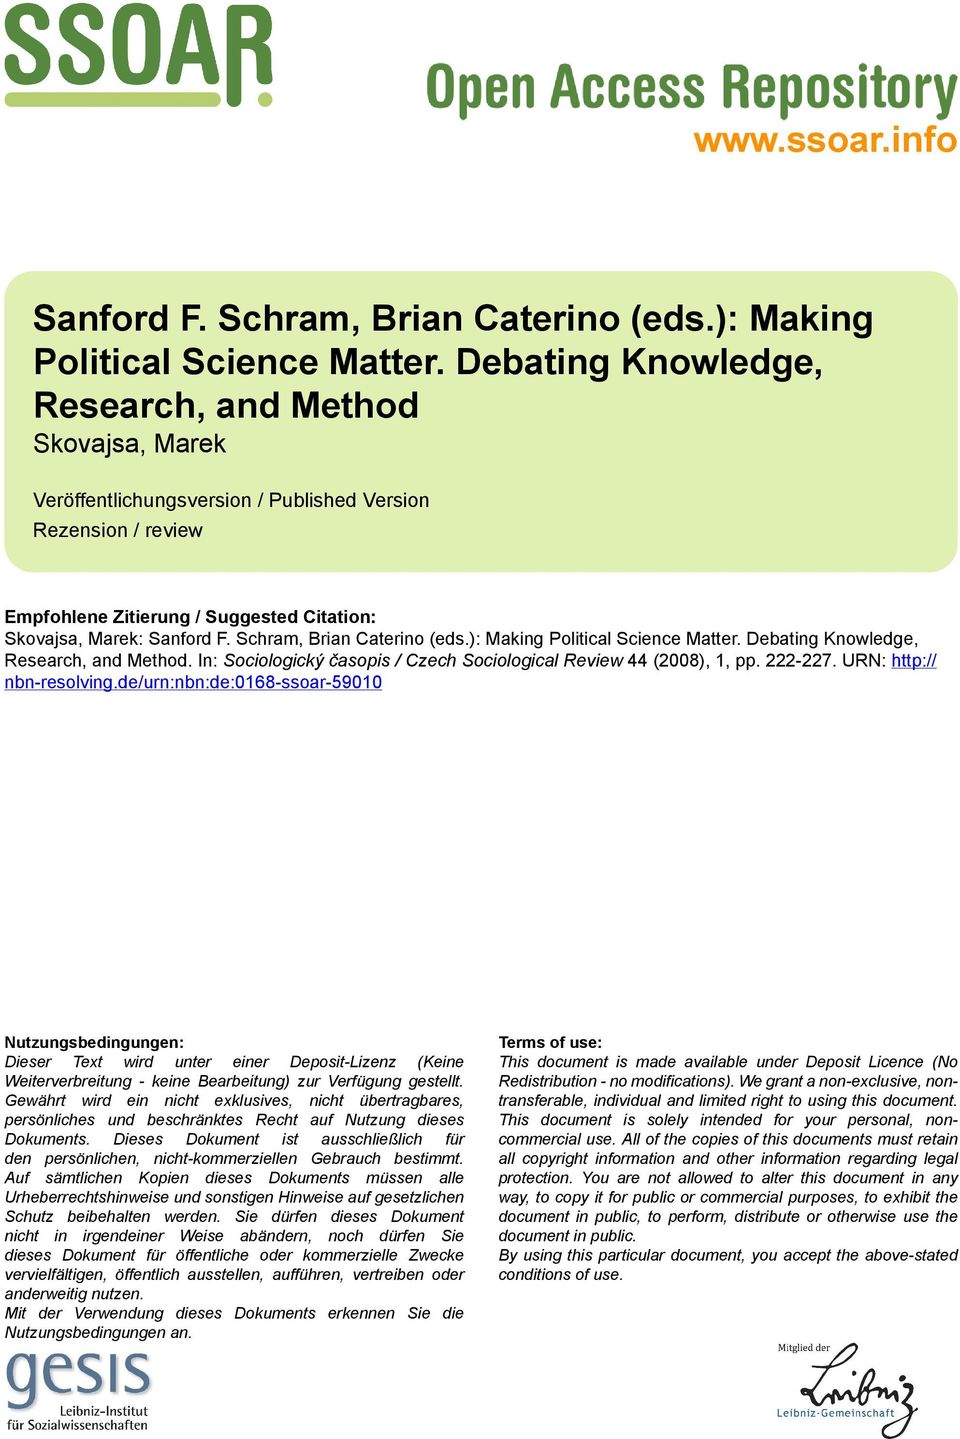 Schram, Brian Caterino (eds.): Making Political Science Matter. Debating Knowledge, Research, and Method. In: Sociologický časopis / Czech Sociological Review 44 (2008), 1, pp. 222-227.